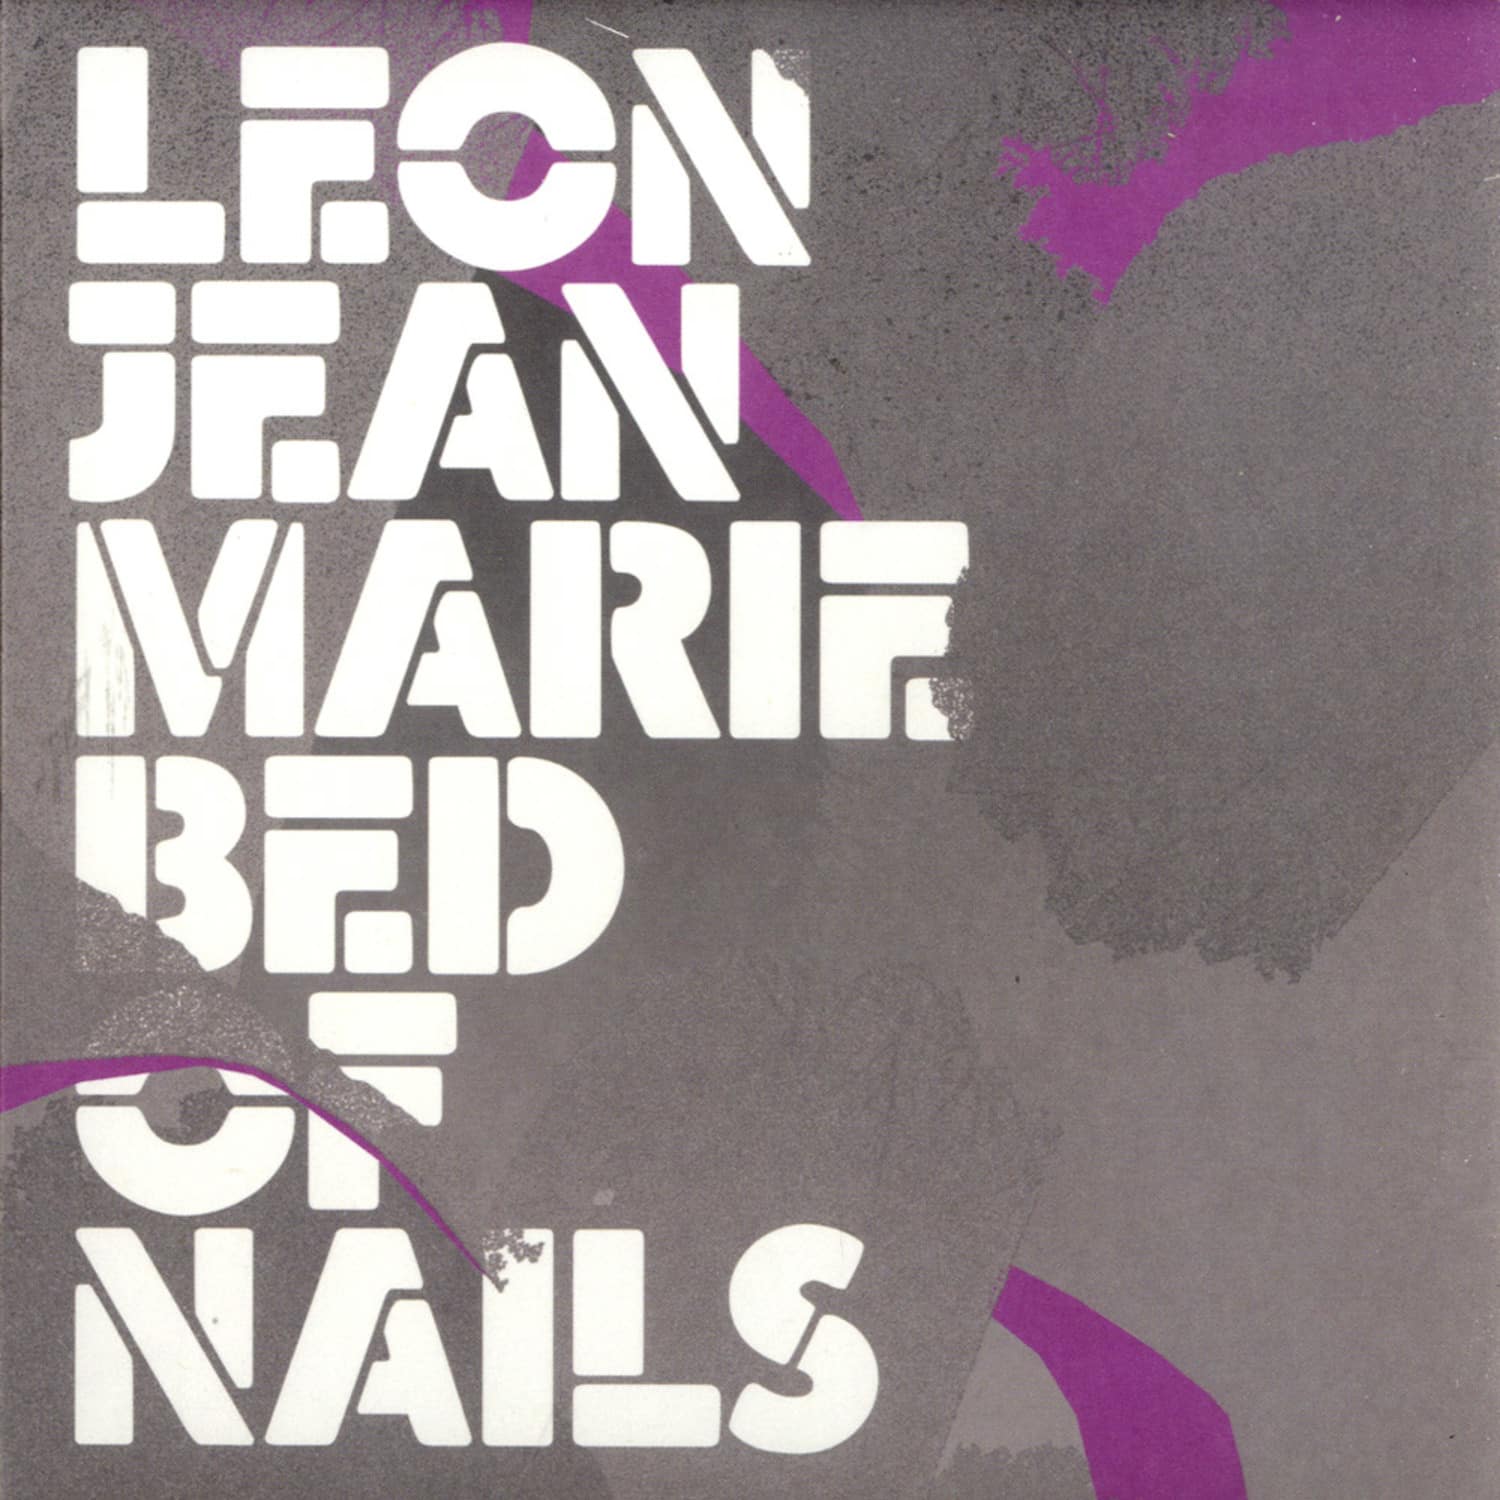 Leon Jean Marie - BED OF NAILS 